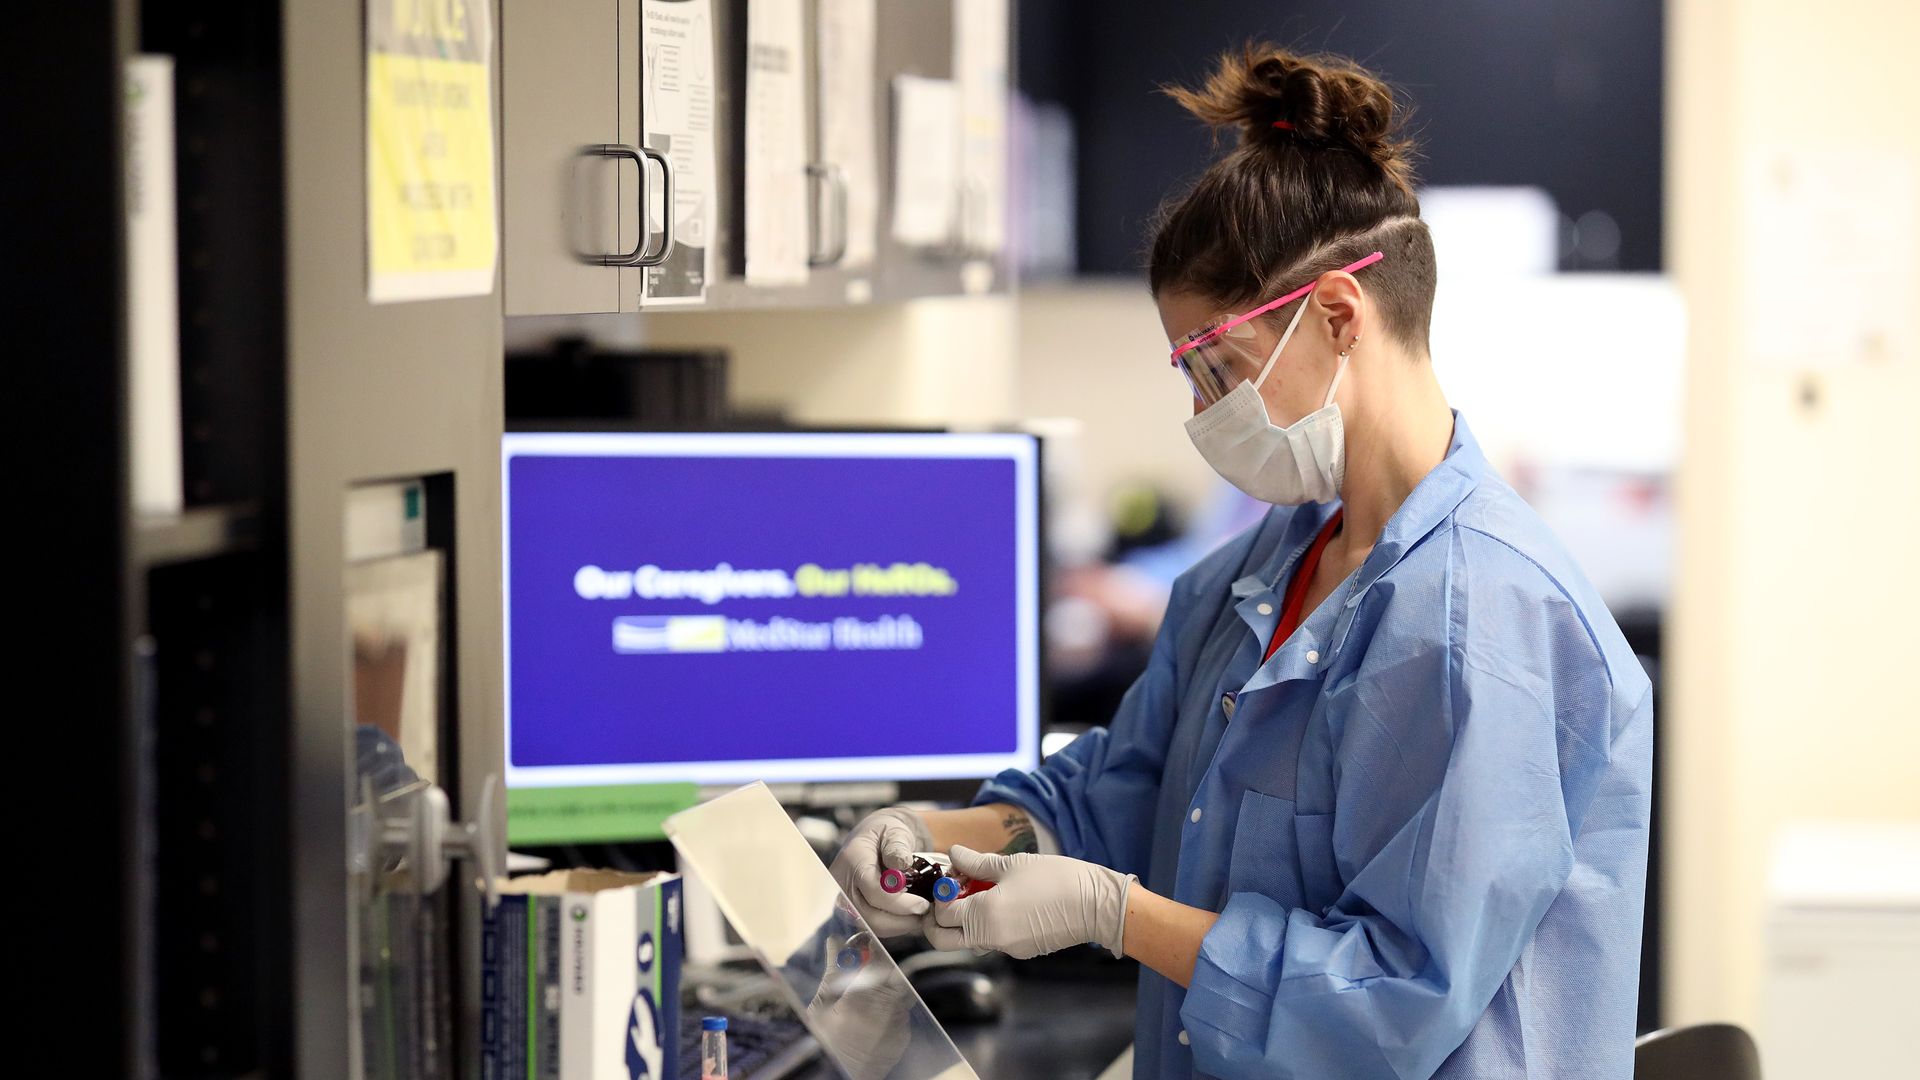 Technicians in the testing lab wear personal protective equipment while processing bloodwork at MedStar St. Mary's Hospital April 8, 2020 in Leonardtown, Maryland. 